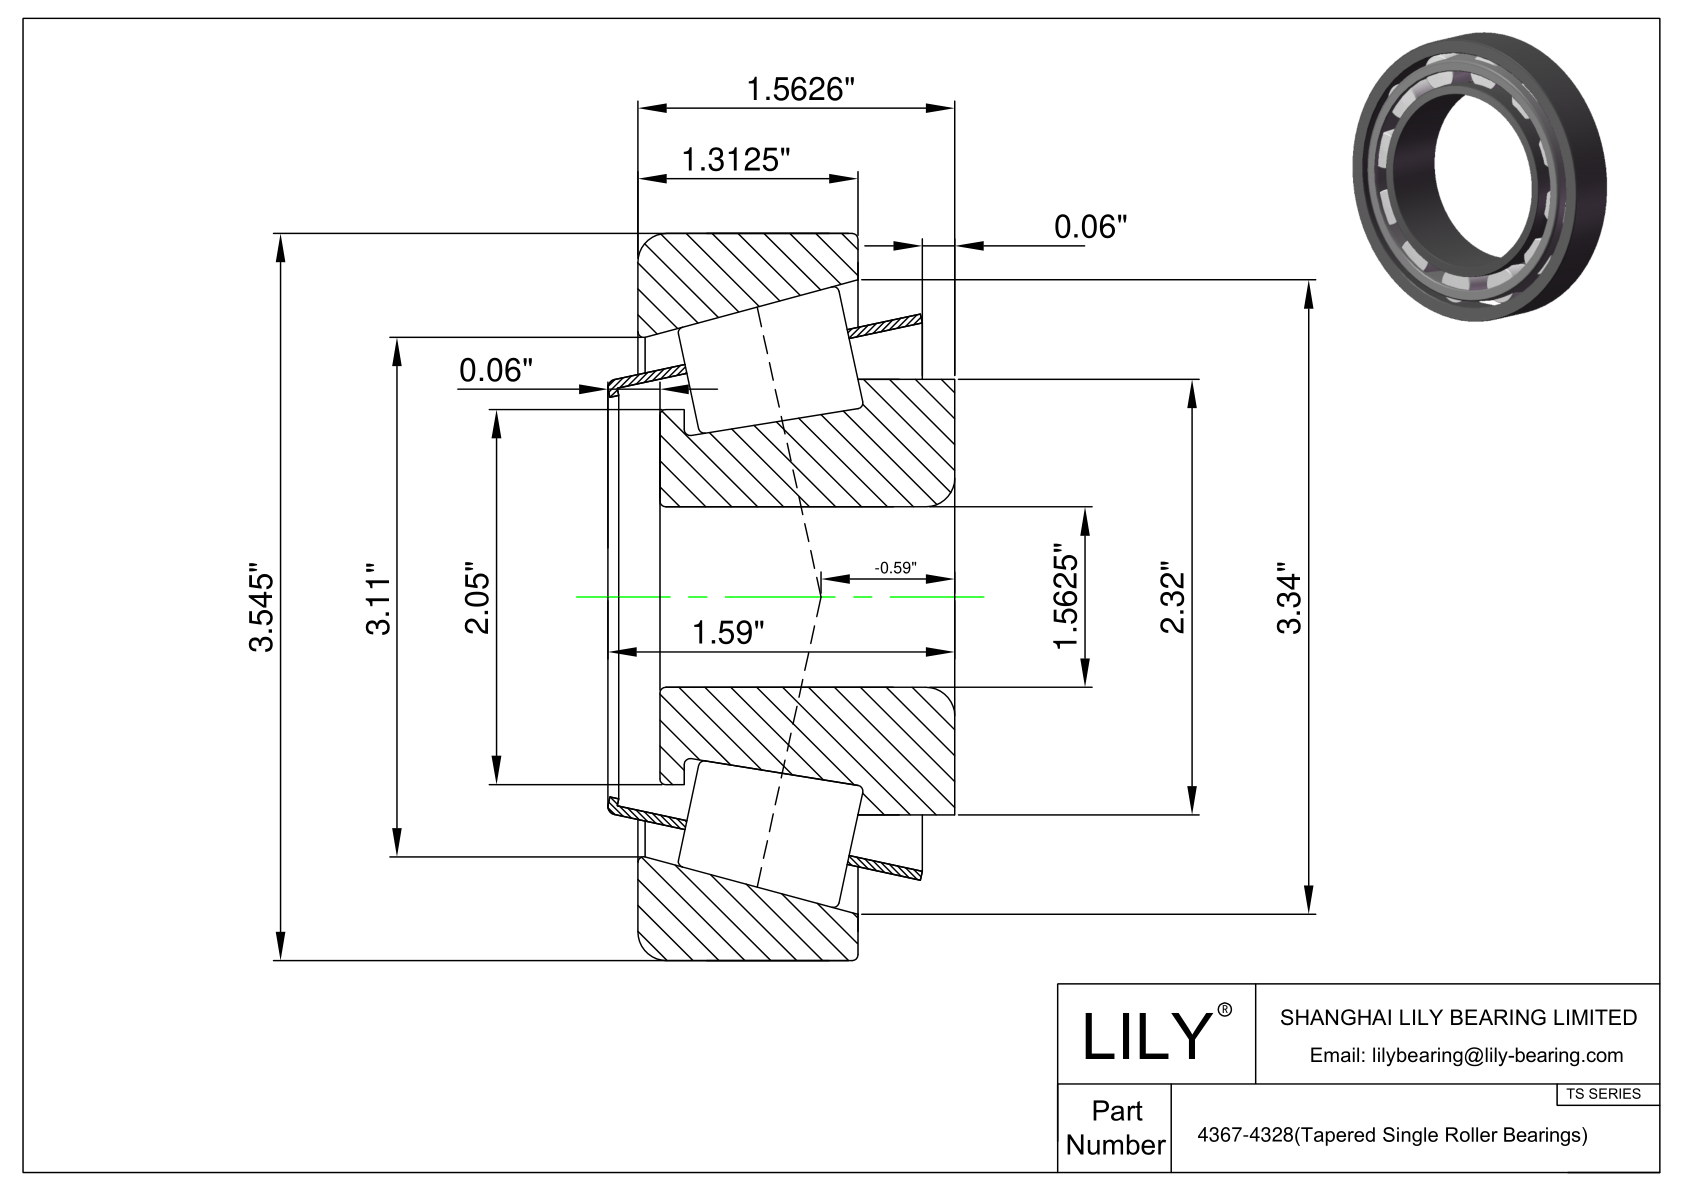 4367-4328 TS (Tapered Single Roller Bearings) (Imperial) cad drawing